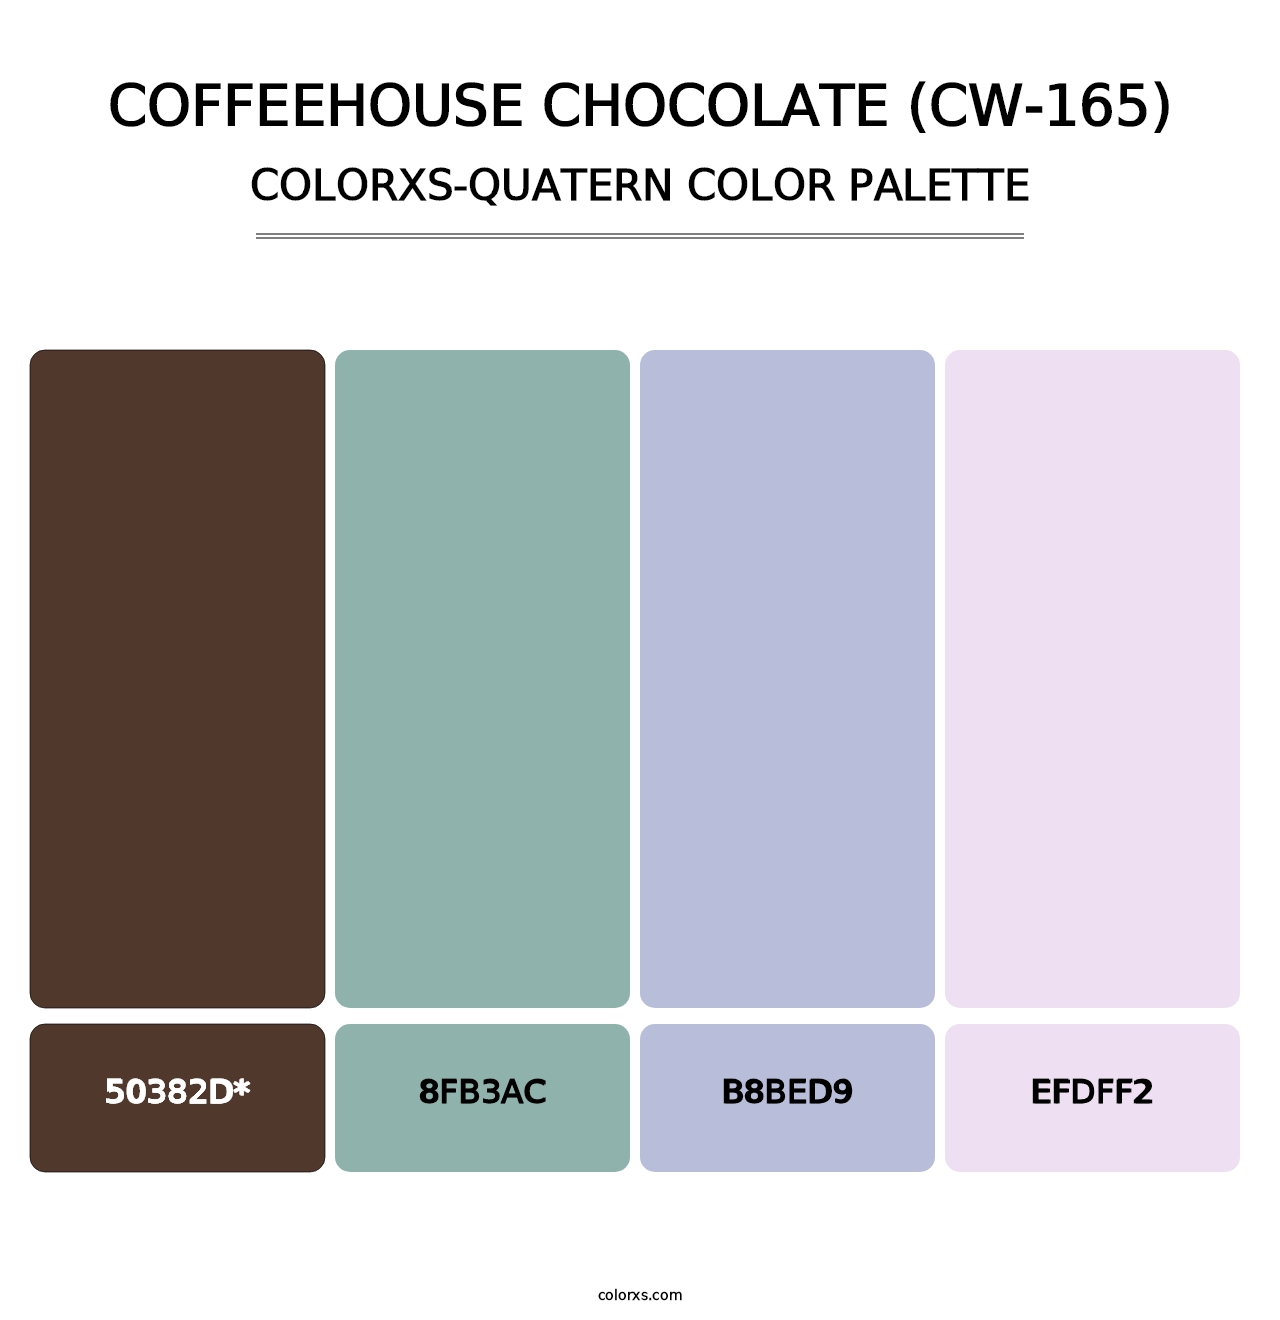 Coffeehouse Chocolate (CW-165) - Colorxs Quatern Palette